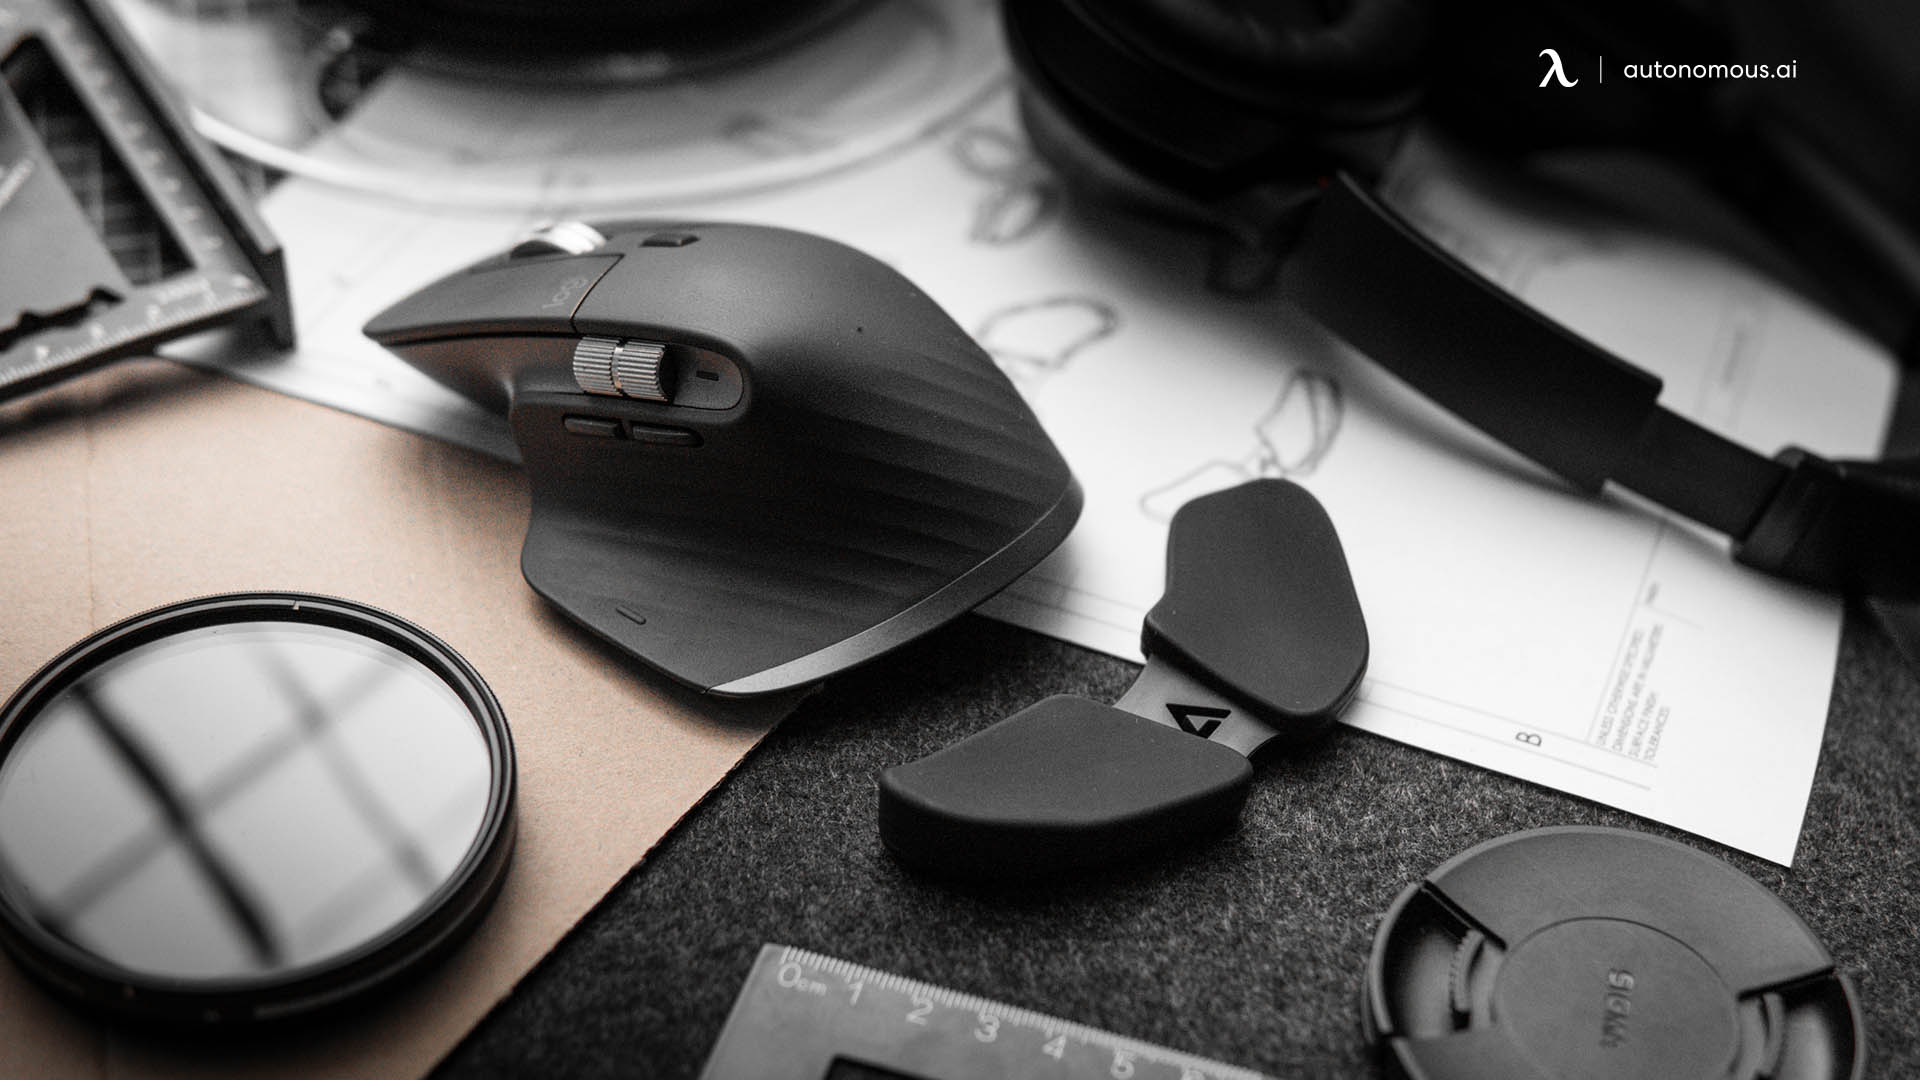 Replace your current mouse with an ergonomic alternative